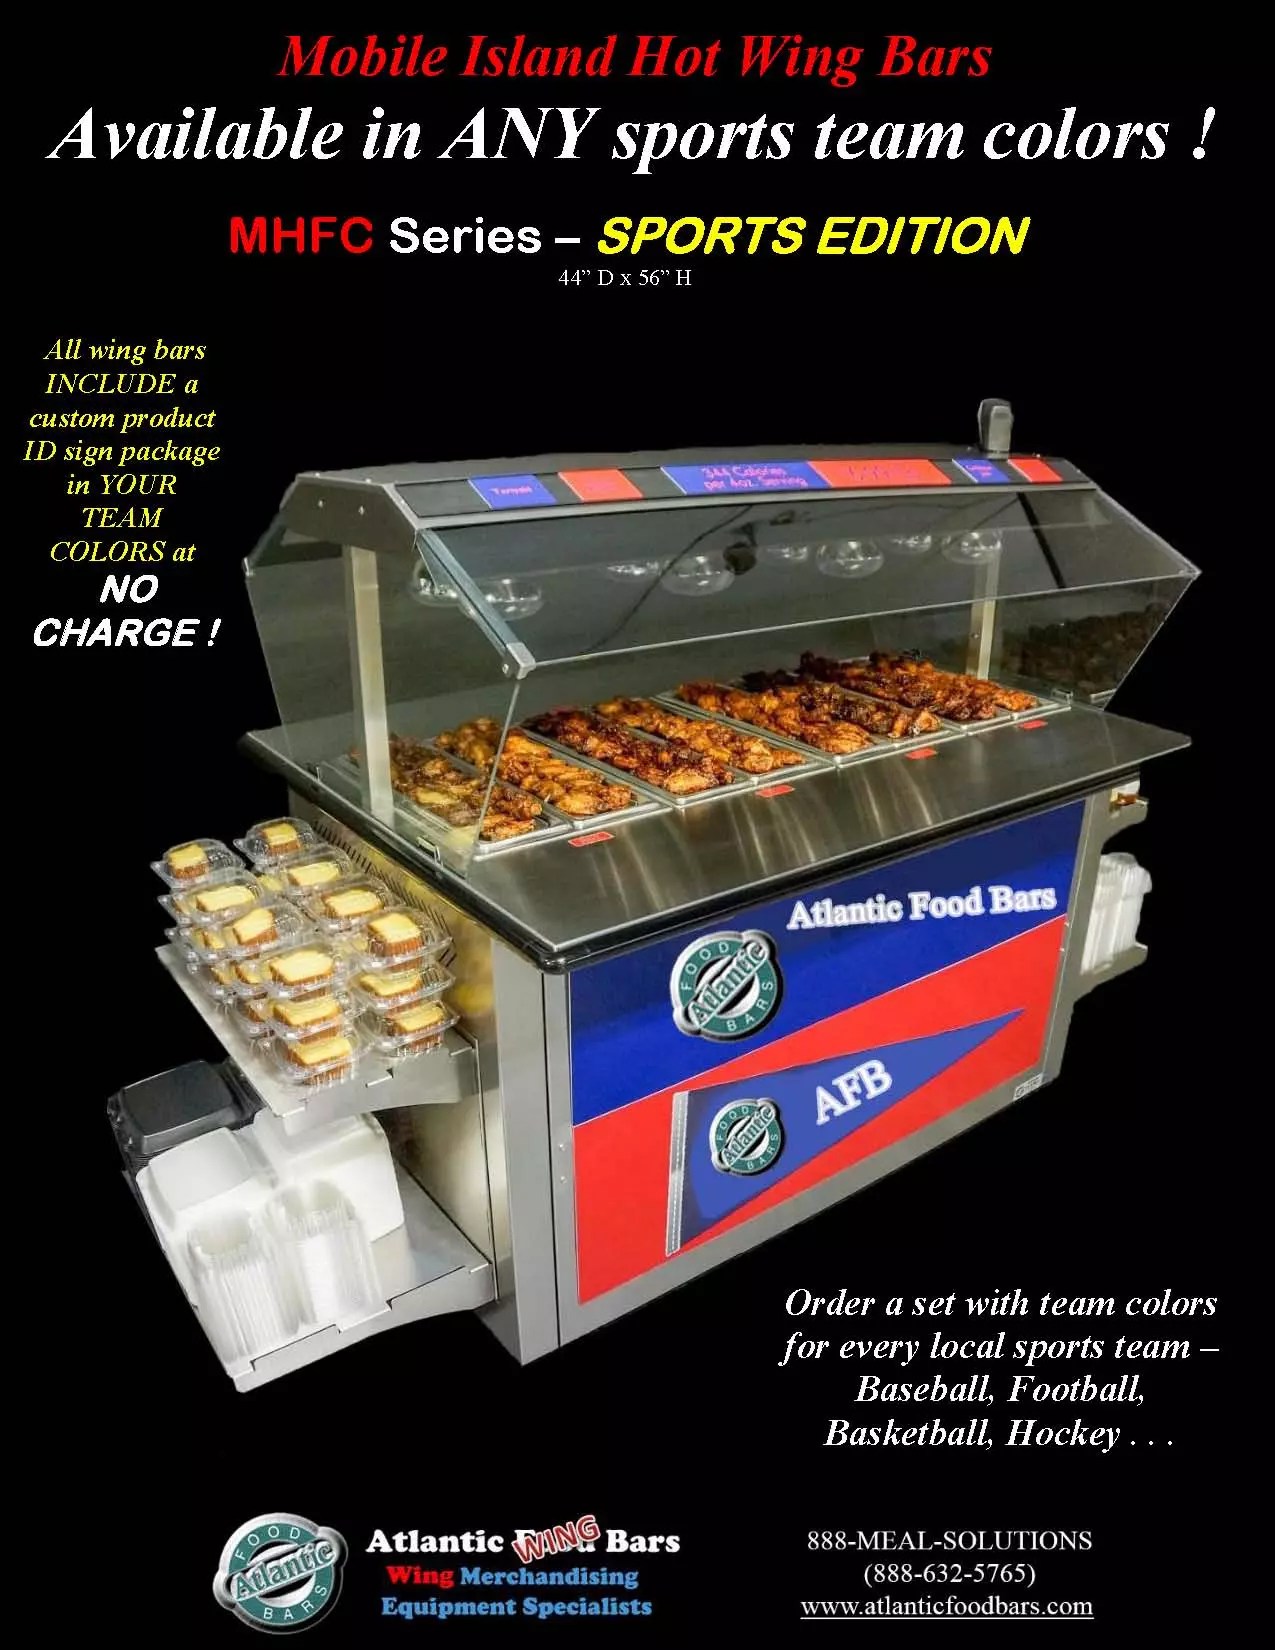 Atlantic-Food-Bars-Hot-Wing-Bar-with-Your-Sports-Team-Colors-MHFC6044_Page_1.jpg